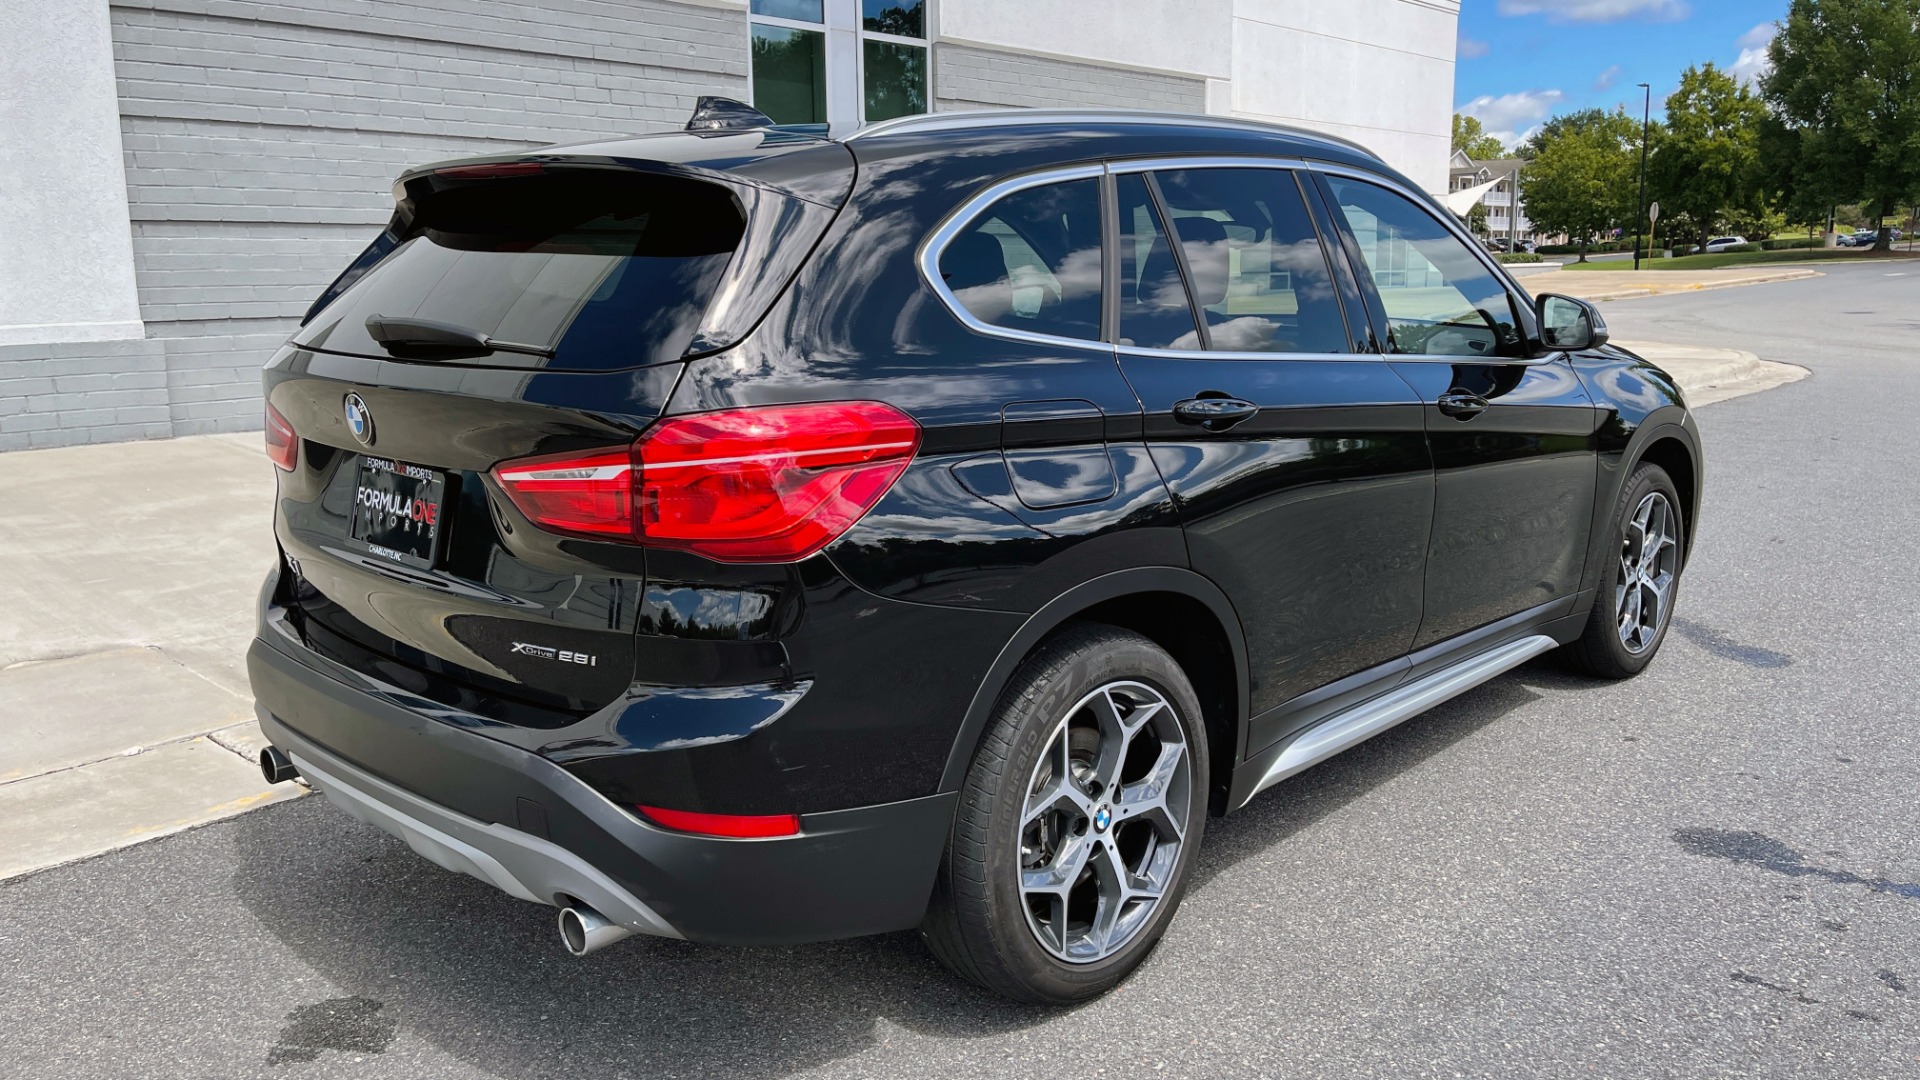 Used 2018 BMW X1 XDRIVE28I / 2.0L / AWD / 8-SPD AUTO / REARVIEW for sale Sold at Formula Imports in Charlotte NC 28227 2